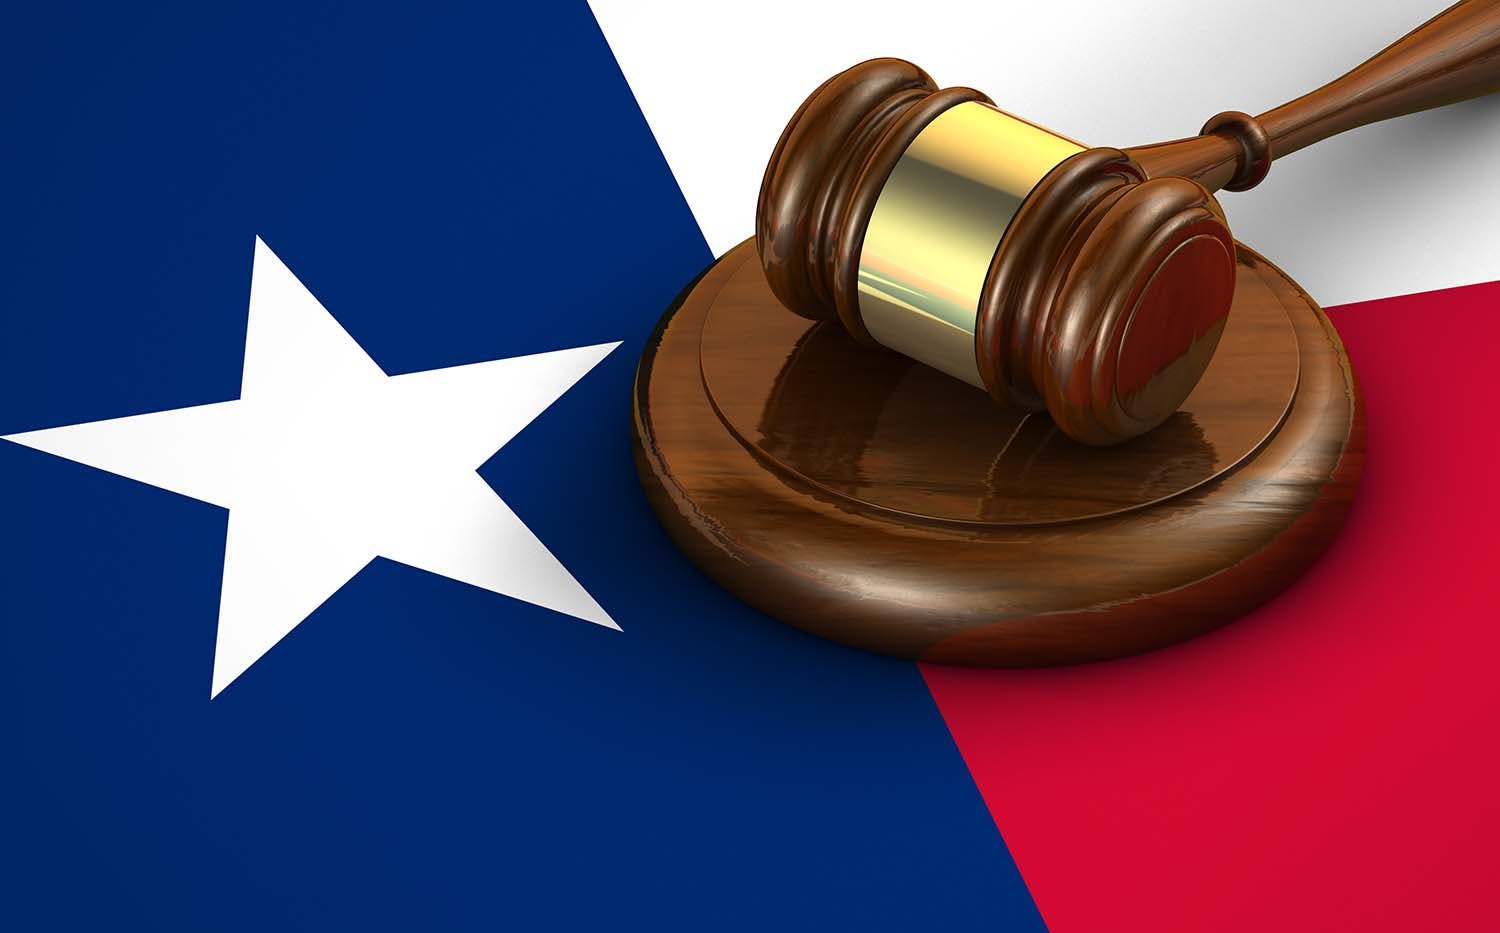 Texas flag with legal gavel on top